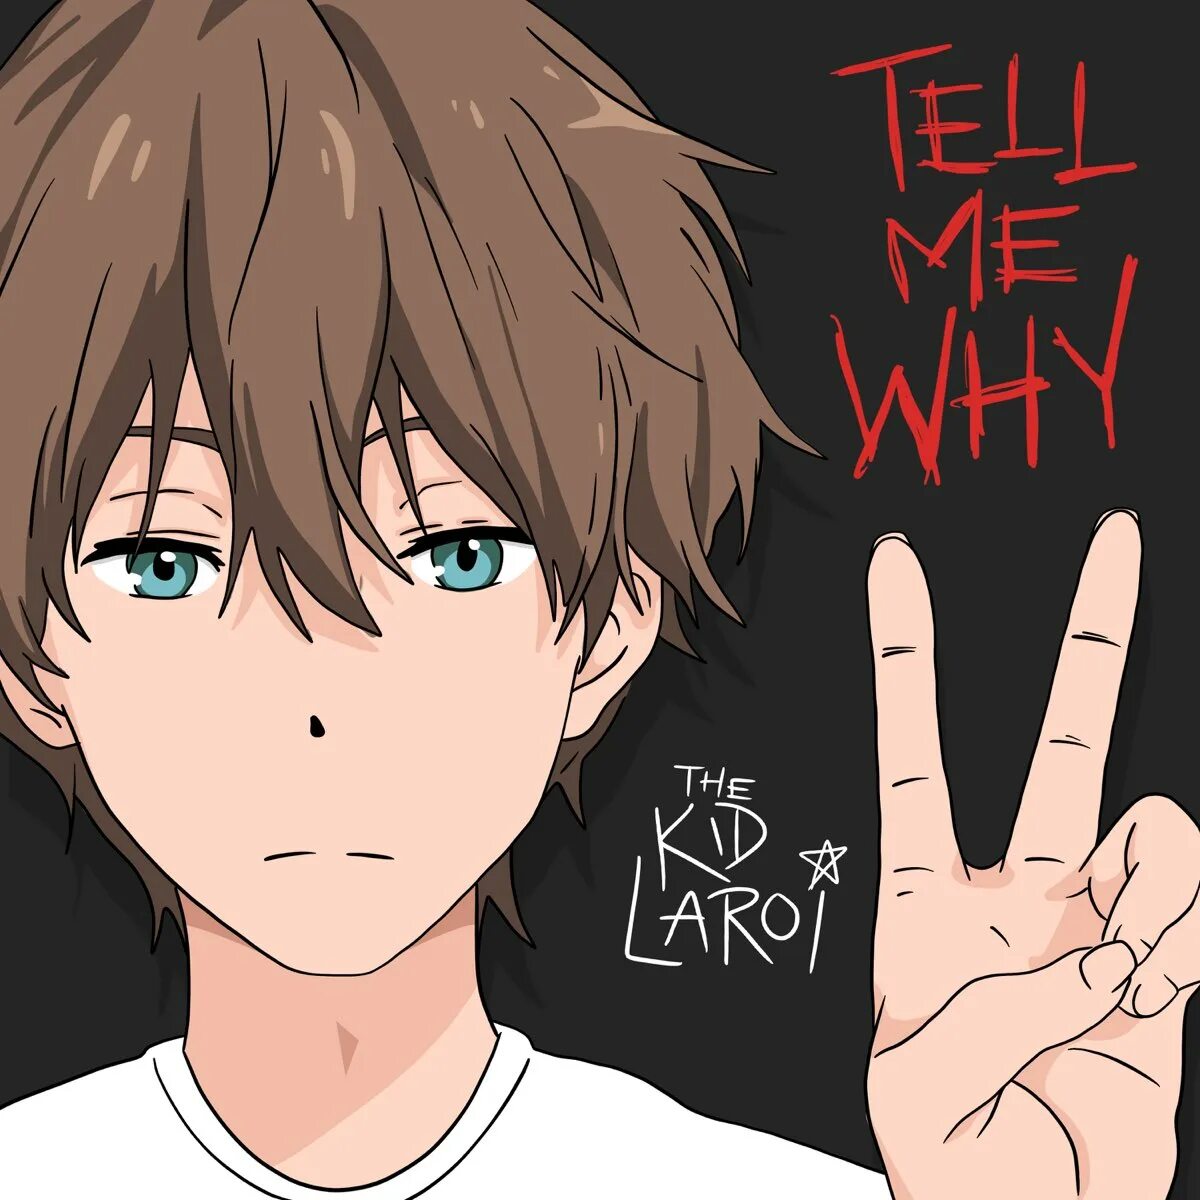 Tell me why boy. The Kid Laroi tell me why. The Kid Laroi Art. Tell me why Laroi. The Kid Laroi песни.